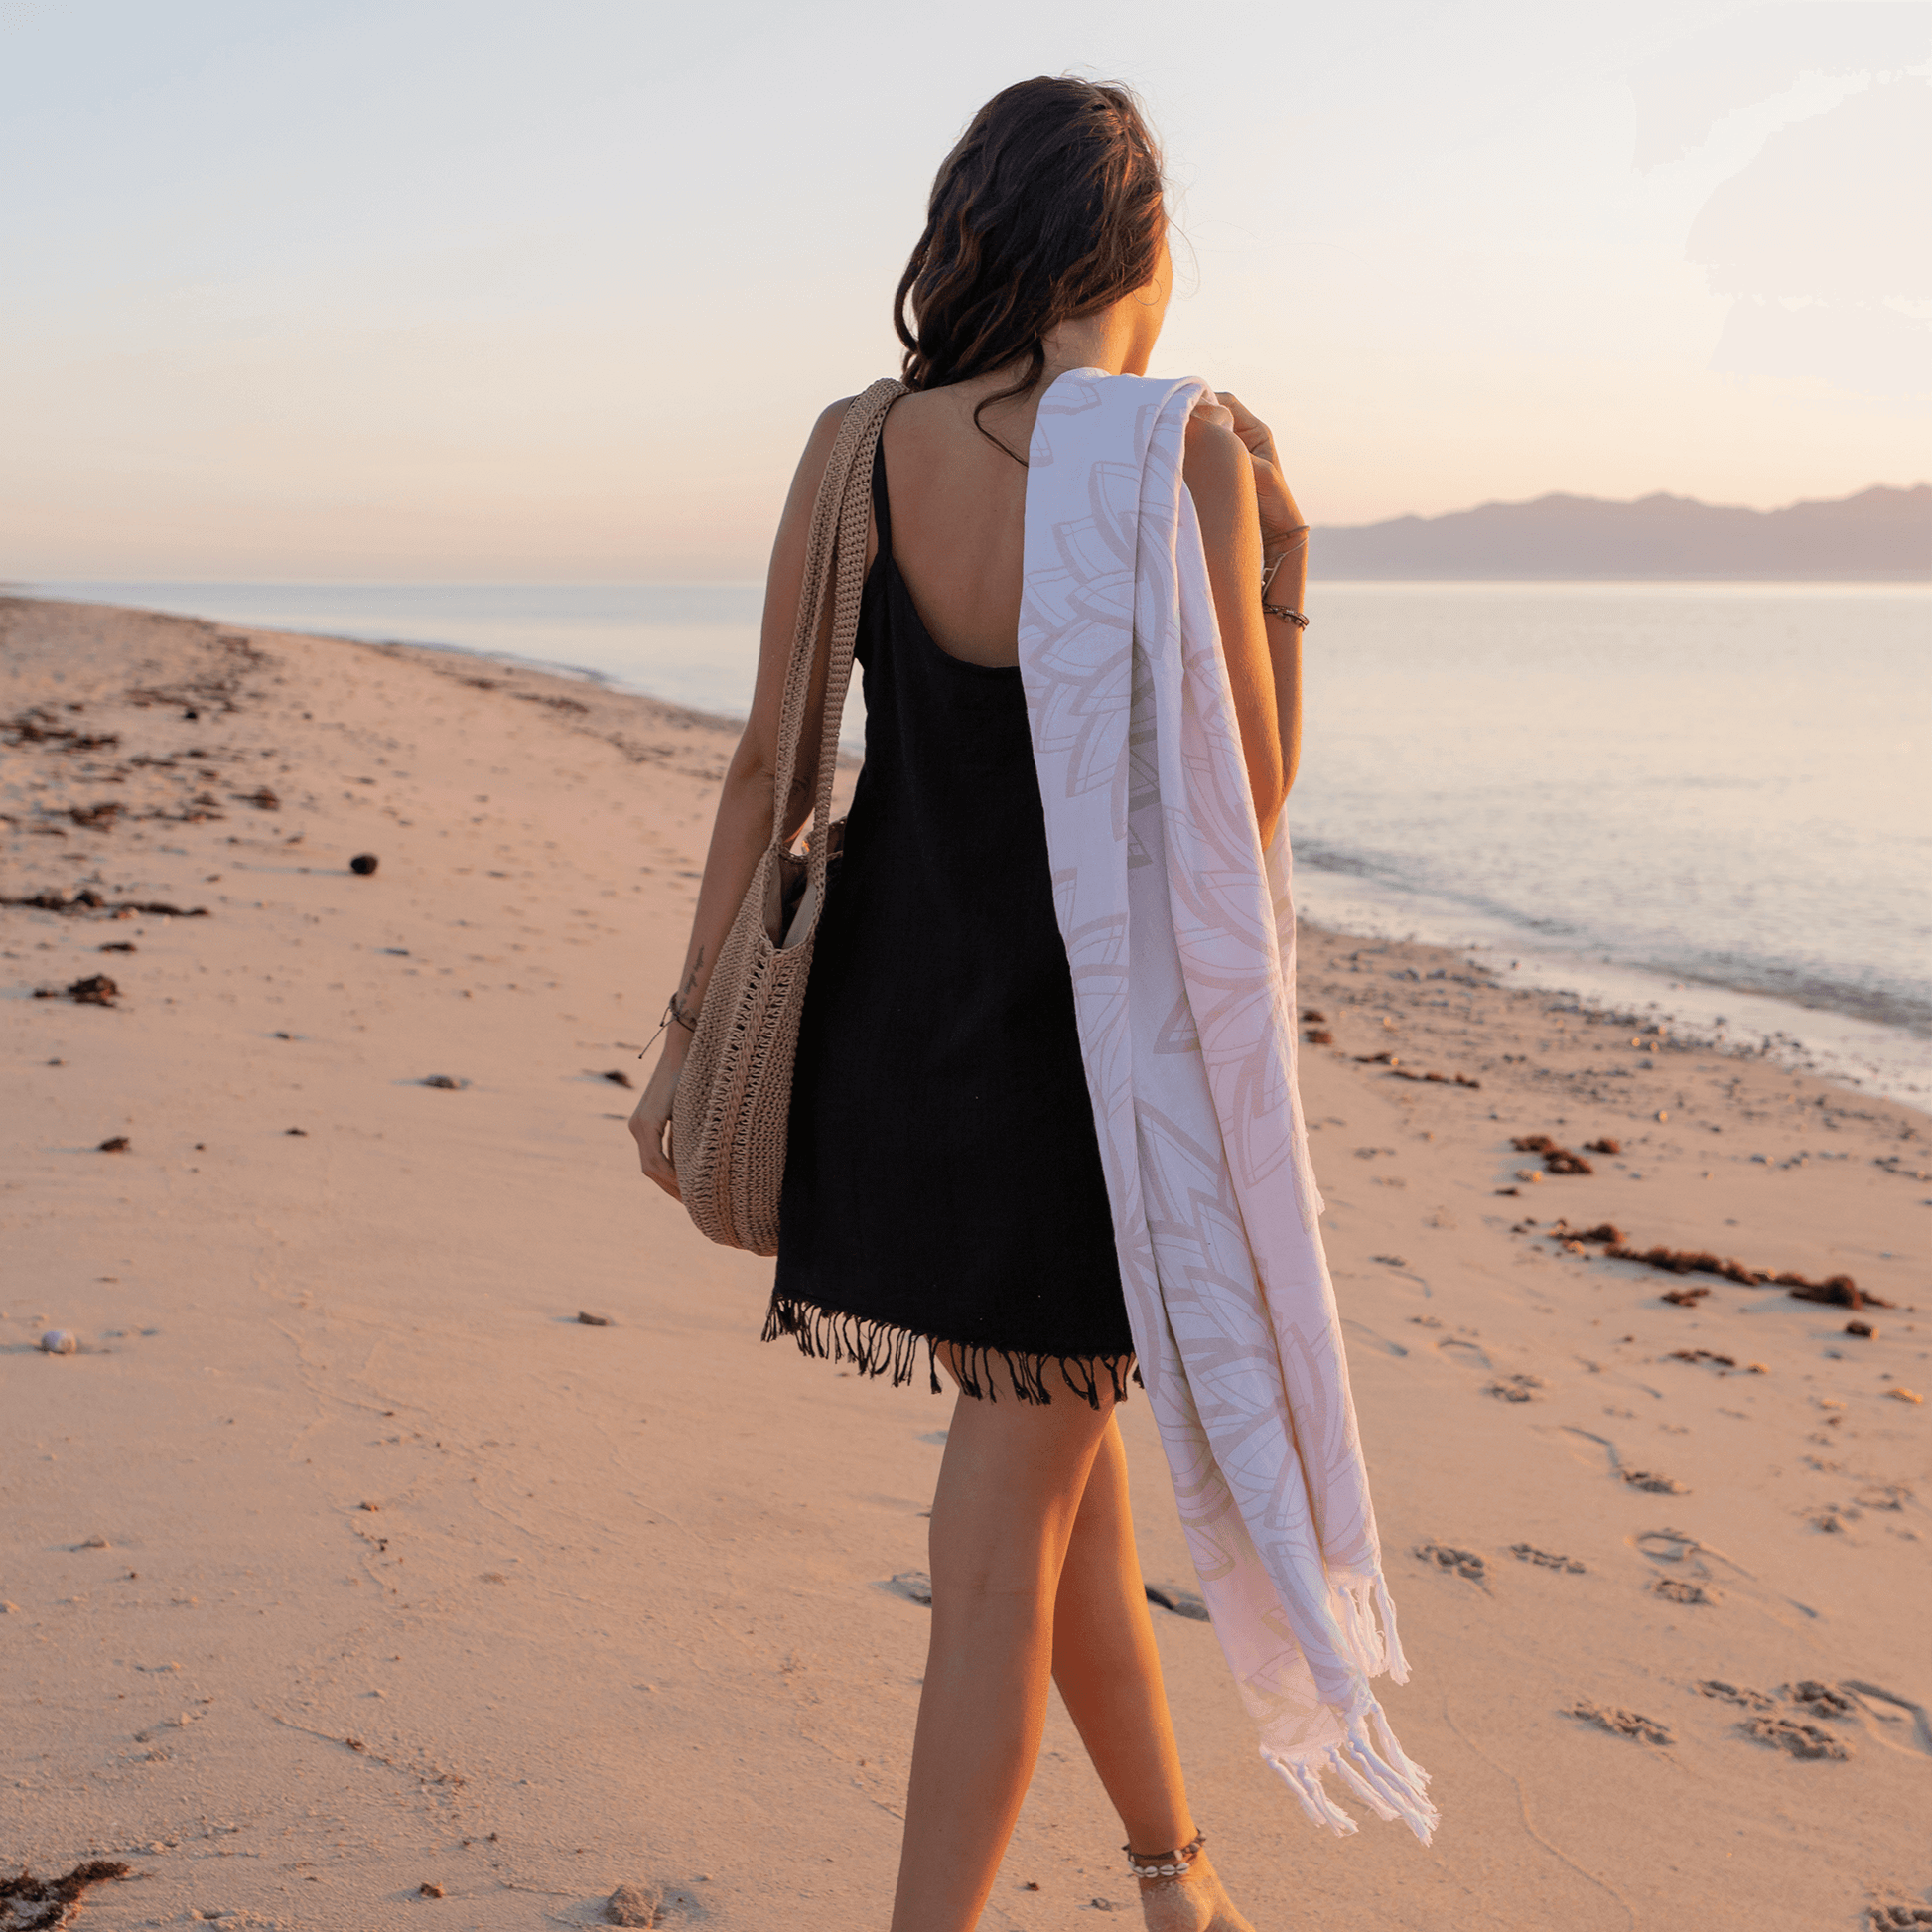 Woman at the beach with a Turkish towel